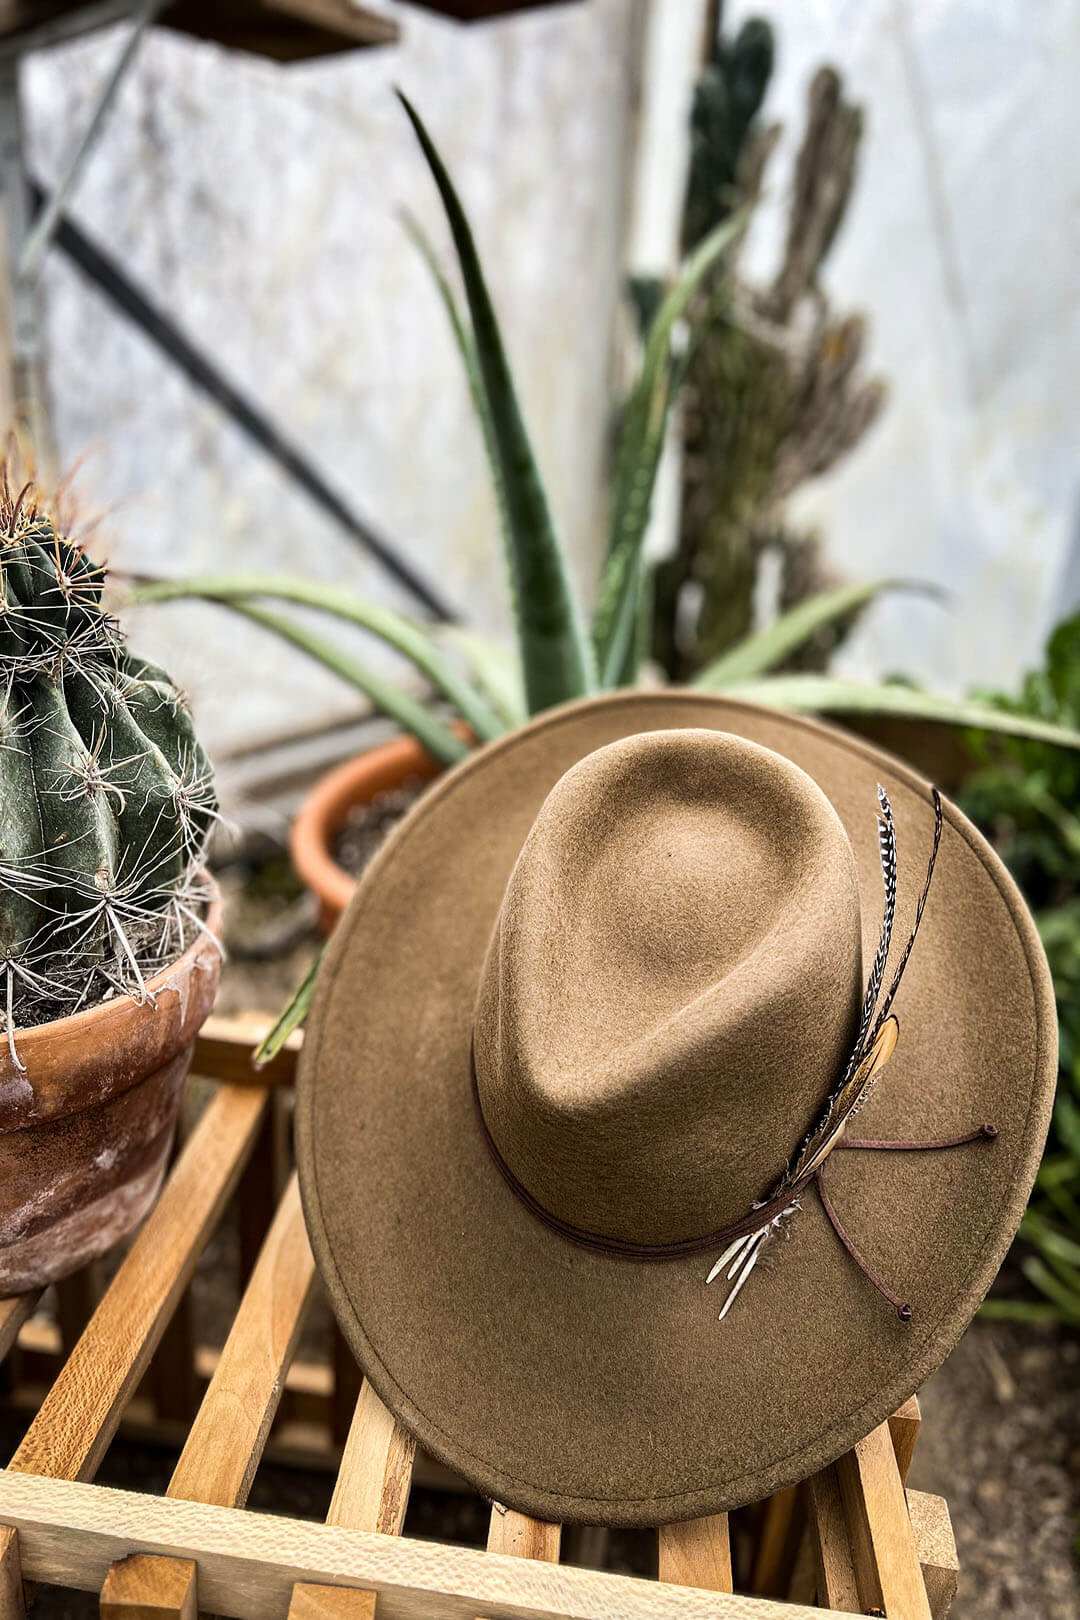 Picture of the stetson coloma hat sitting on top of a crate with cactus plants surrounding it.  The coloma hat is brown in color.  